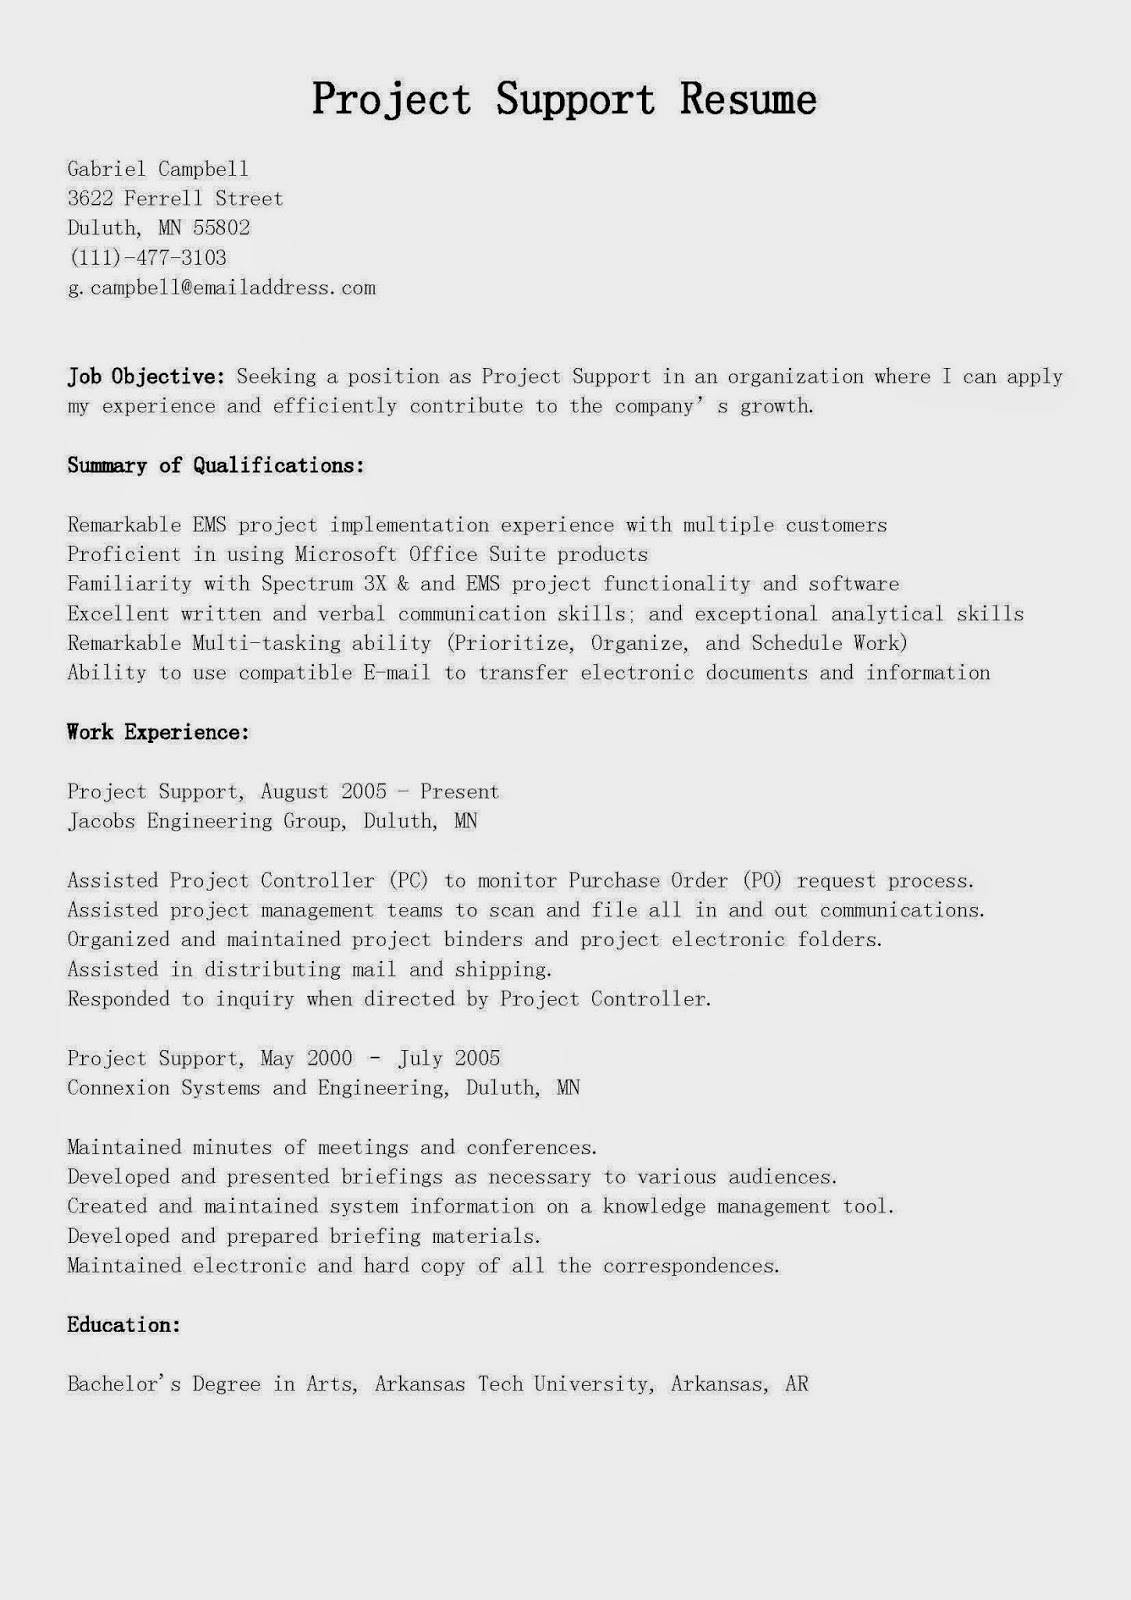 Resume horace campbell